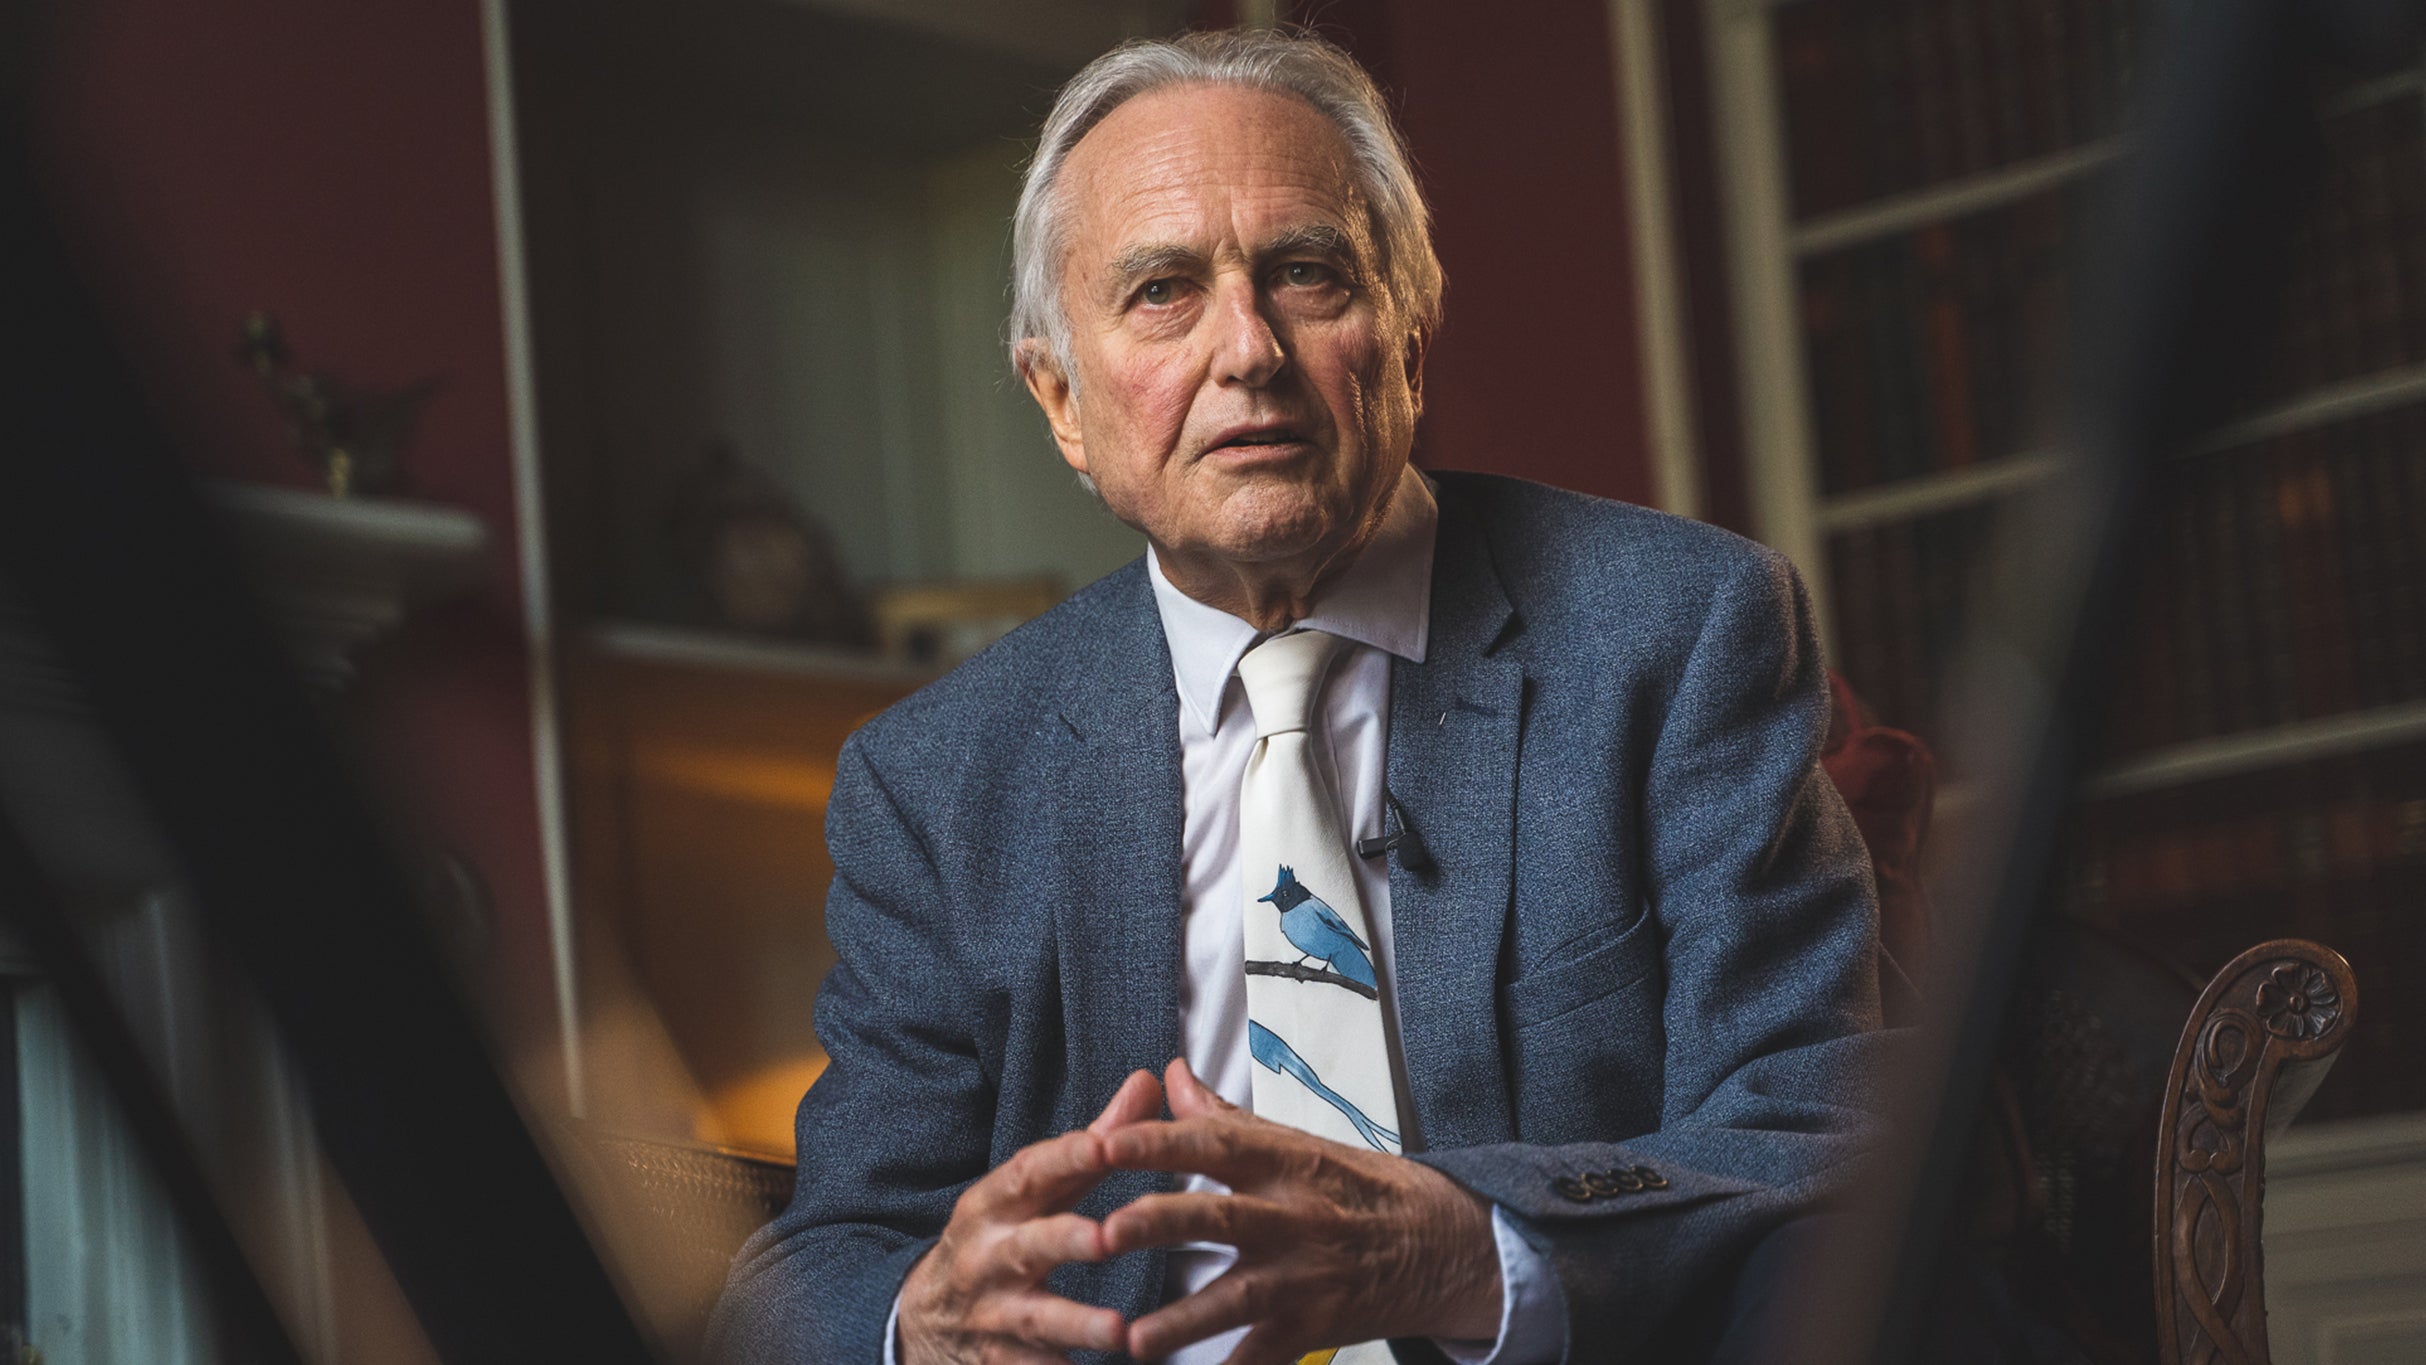 An Evening with Richard Dawkins and Friends presale password for advance tickets in Dublin